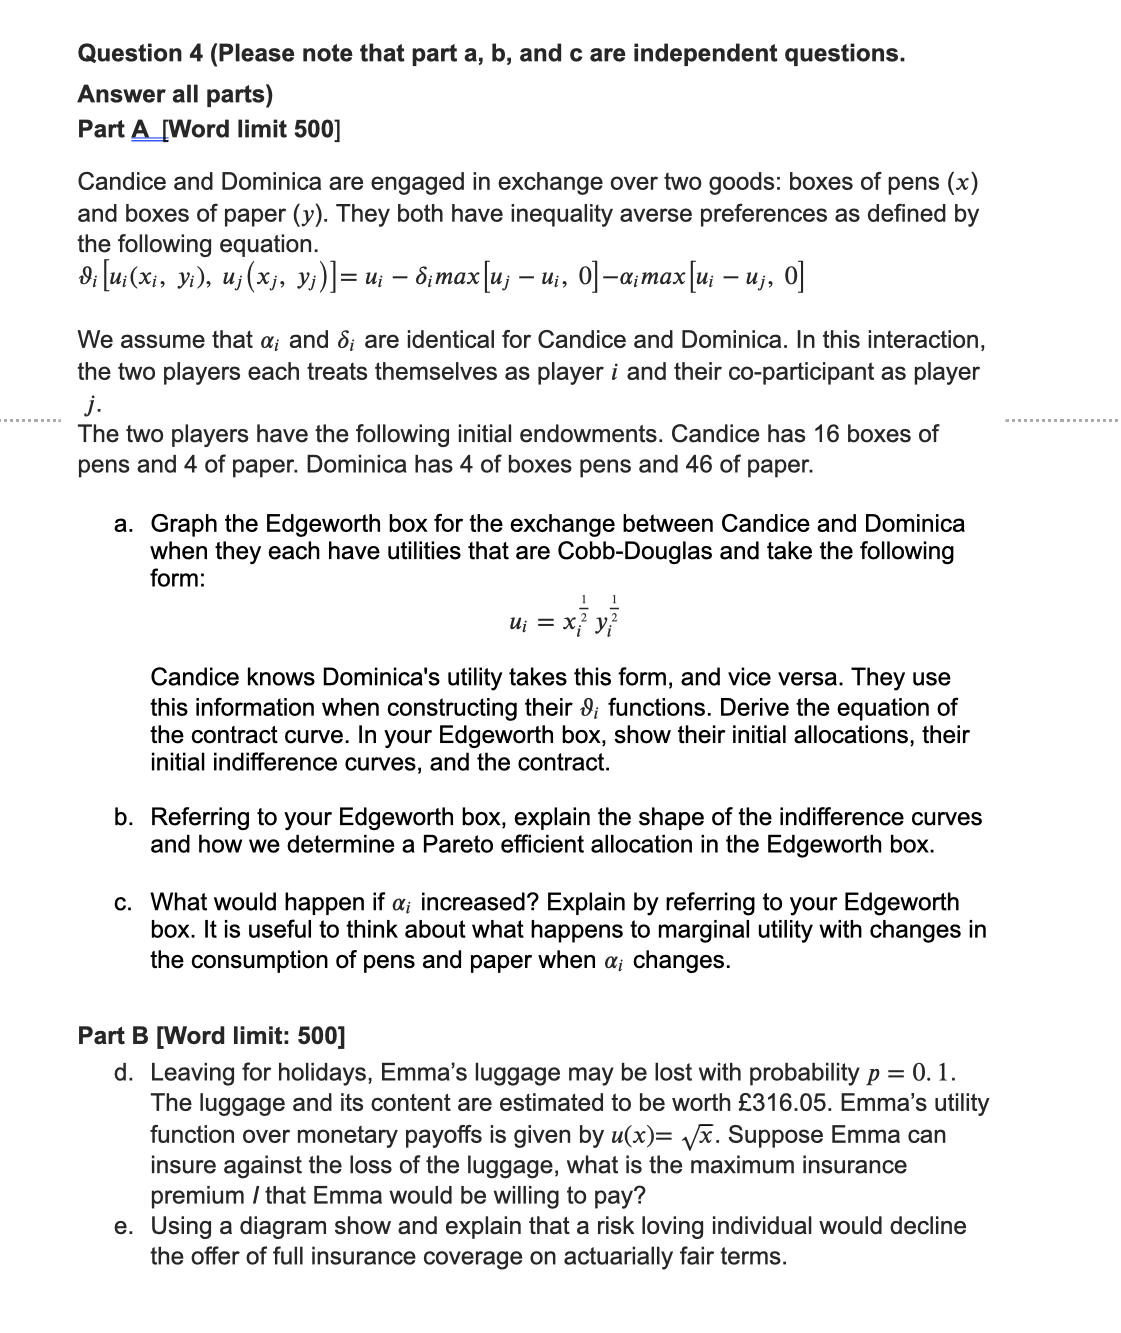 Question 4 (Please note that part a, b, and c are independent questions.
Answer all parts)
Part A [Word limit 500]
Candice and Dominica are engaged in exchange over two goods: boxes of pens (x)
and boxes of paper (y). They both have inequality averse preferences as defined by
the following equation.
d¡ [u¡(Xi, Yi), Uj(xj, y¡)]= u¡ — 8¡max[u¡ — u¡, 0]—α¡max [u¡ — Uj,
-
-
o]
We assume that a; and 8; are identical for Candice and Dominica. In this interaction,
the two players each treats themselves as player i and their co-participant as player
j.
The two players have the following initial endowments. Candice has 16 boxes of
pens and 4 of paper. Dominica has 4 of boxes pens and 46 of paper.
a. Graph the Edgeworth box for the exchange between Candice and Dominica
when they each have utilities that are Cobb-Douglas and take the following
form:
1
U₁ = x² y}
y²
Candice knows Dominica's utility takes this form, and vice versa. They use
this information when constructing their ; functions. Derive the equation of
the contract curve. In your Edgeworth box, show their initial allocations, their
initial indifference curves, and the contract.
b. Referring to your Edgeworth box, explain the shape of the indifference curves
and how we determine a Pareto efficient allocation in the Edgeworth box.
c. What would happen if a; increased? Explain by referring to your Edgeworth
box. It is useful to think about what happens to marginal utility with changes in
the consumption of pens and paper when a; changes.
Part B [Word limit: 500]
d. Leaving for holidays, Emma's luggage may be lost with probability p = 0. 1.
The luggage and its content are estimated to be worth £316.05. Emma's utility
function over monetary payoffs is given by u(x)=√x. Suppose Emma can
insure against the loss of the luggage, what is the maximum insurance
premium / that Emma would be willing to pay?
e. Using a diagram show and explain that a risk loving individual would decline
the offer of full insurance coverage on actuarially fair terms.